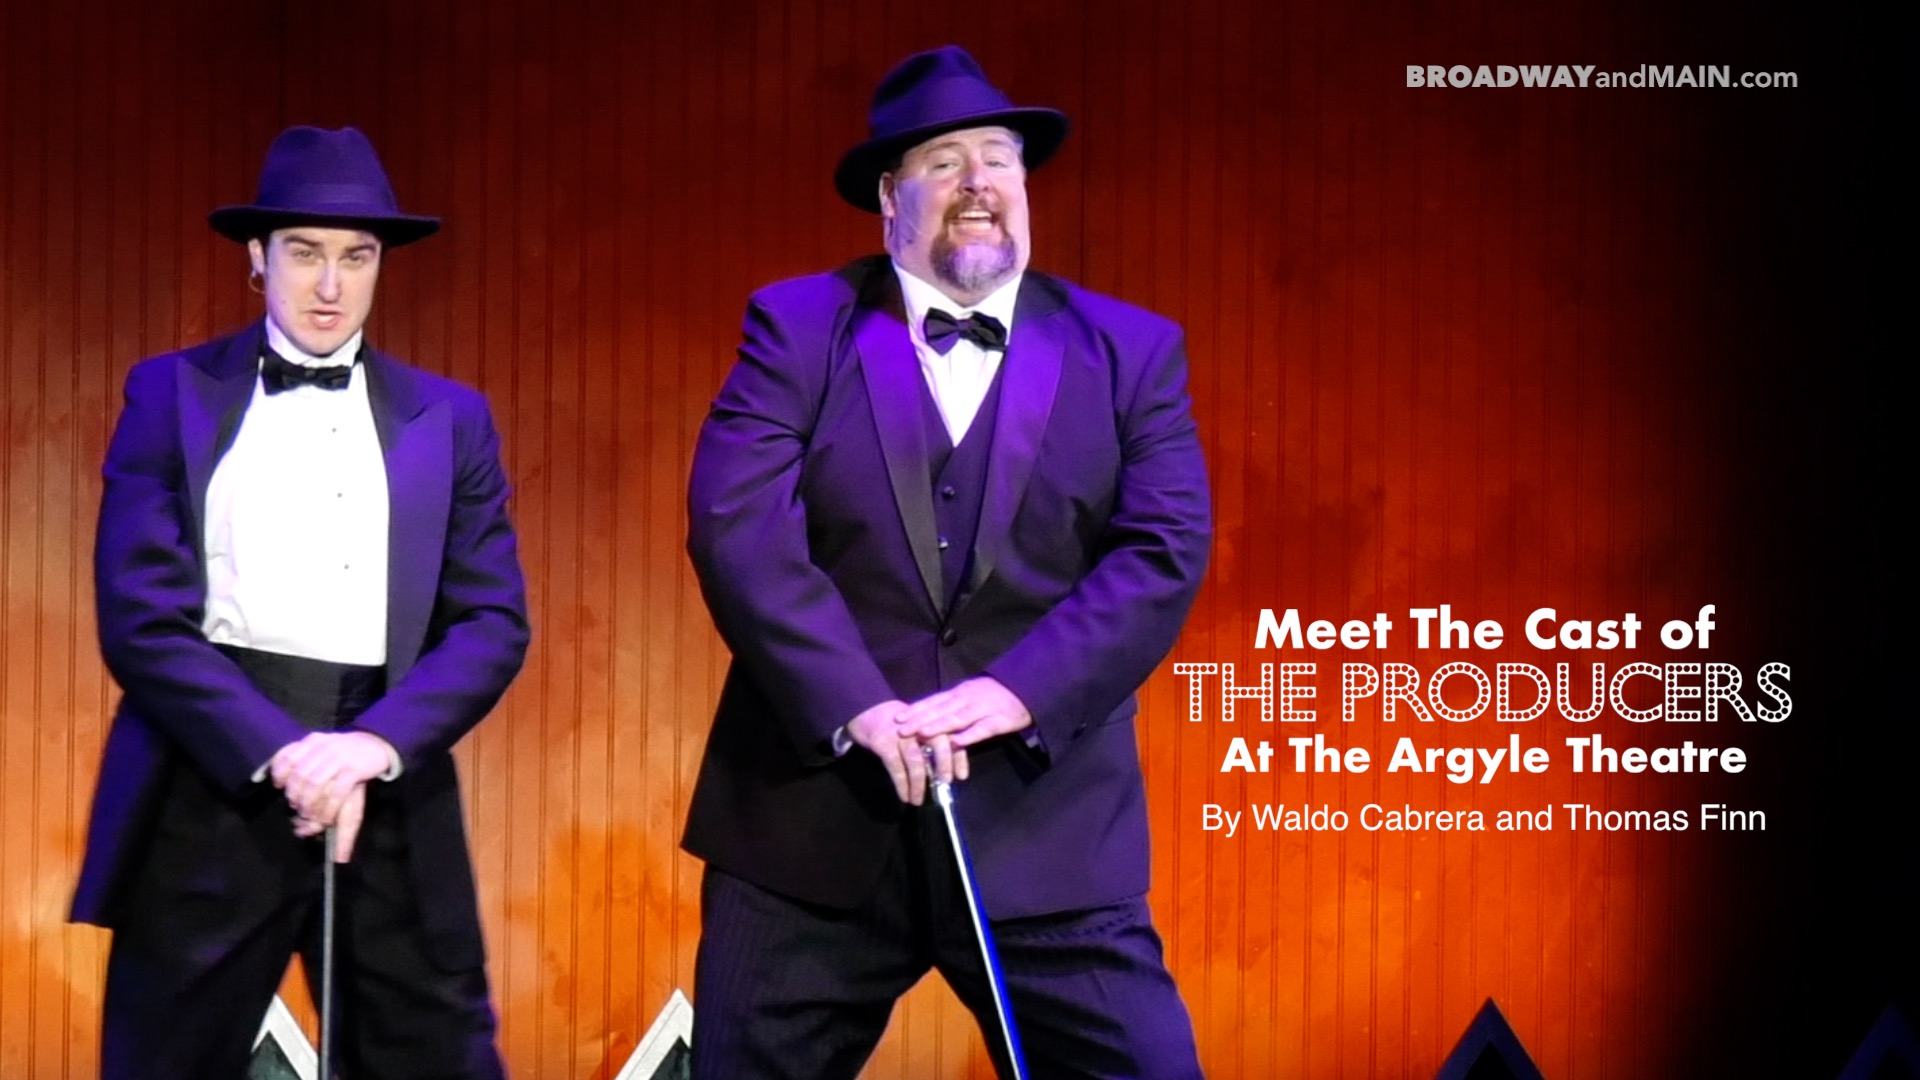 Meet The Cast of The Producers at The Argyle Theatre